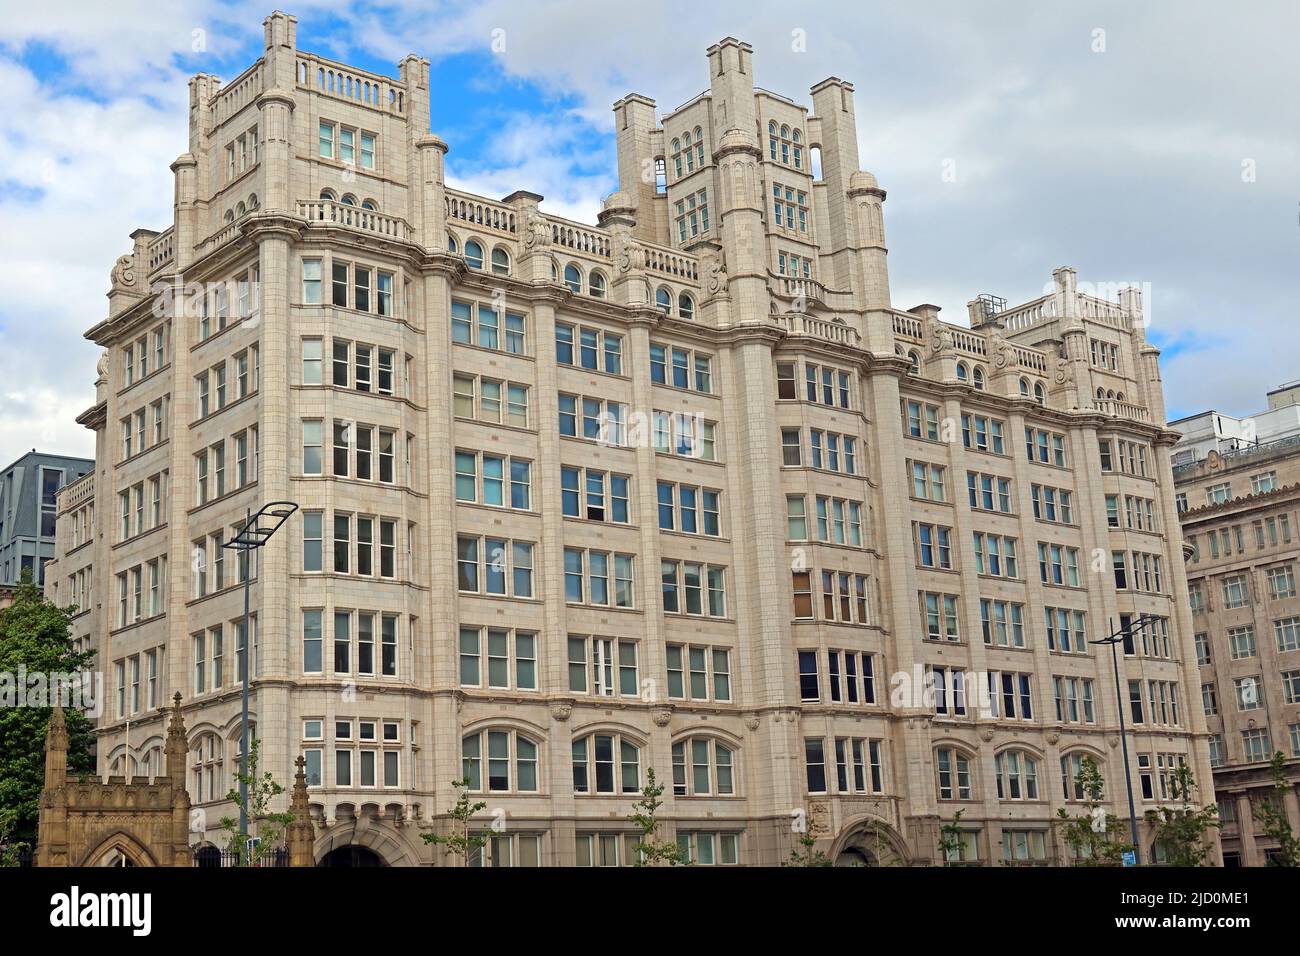 The Liverpool Tower Buildings 1908, at 3 Tower Gardens, Liverpool, Merseyside, England, UK, L3 1LG Stockfoto